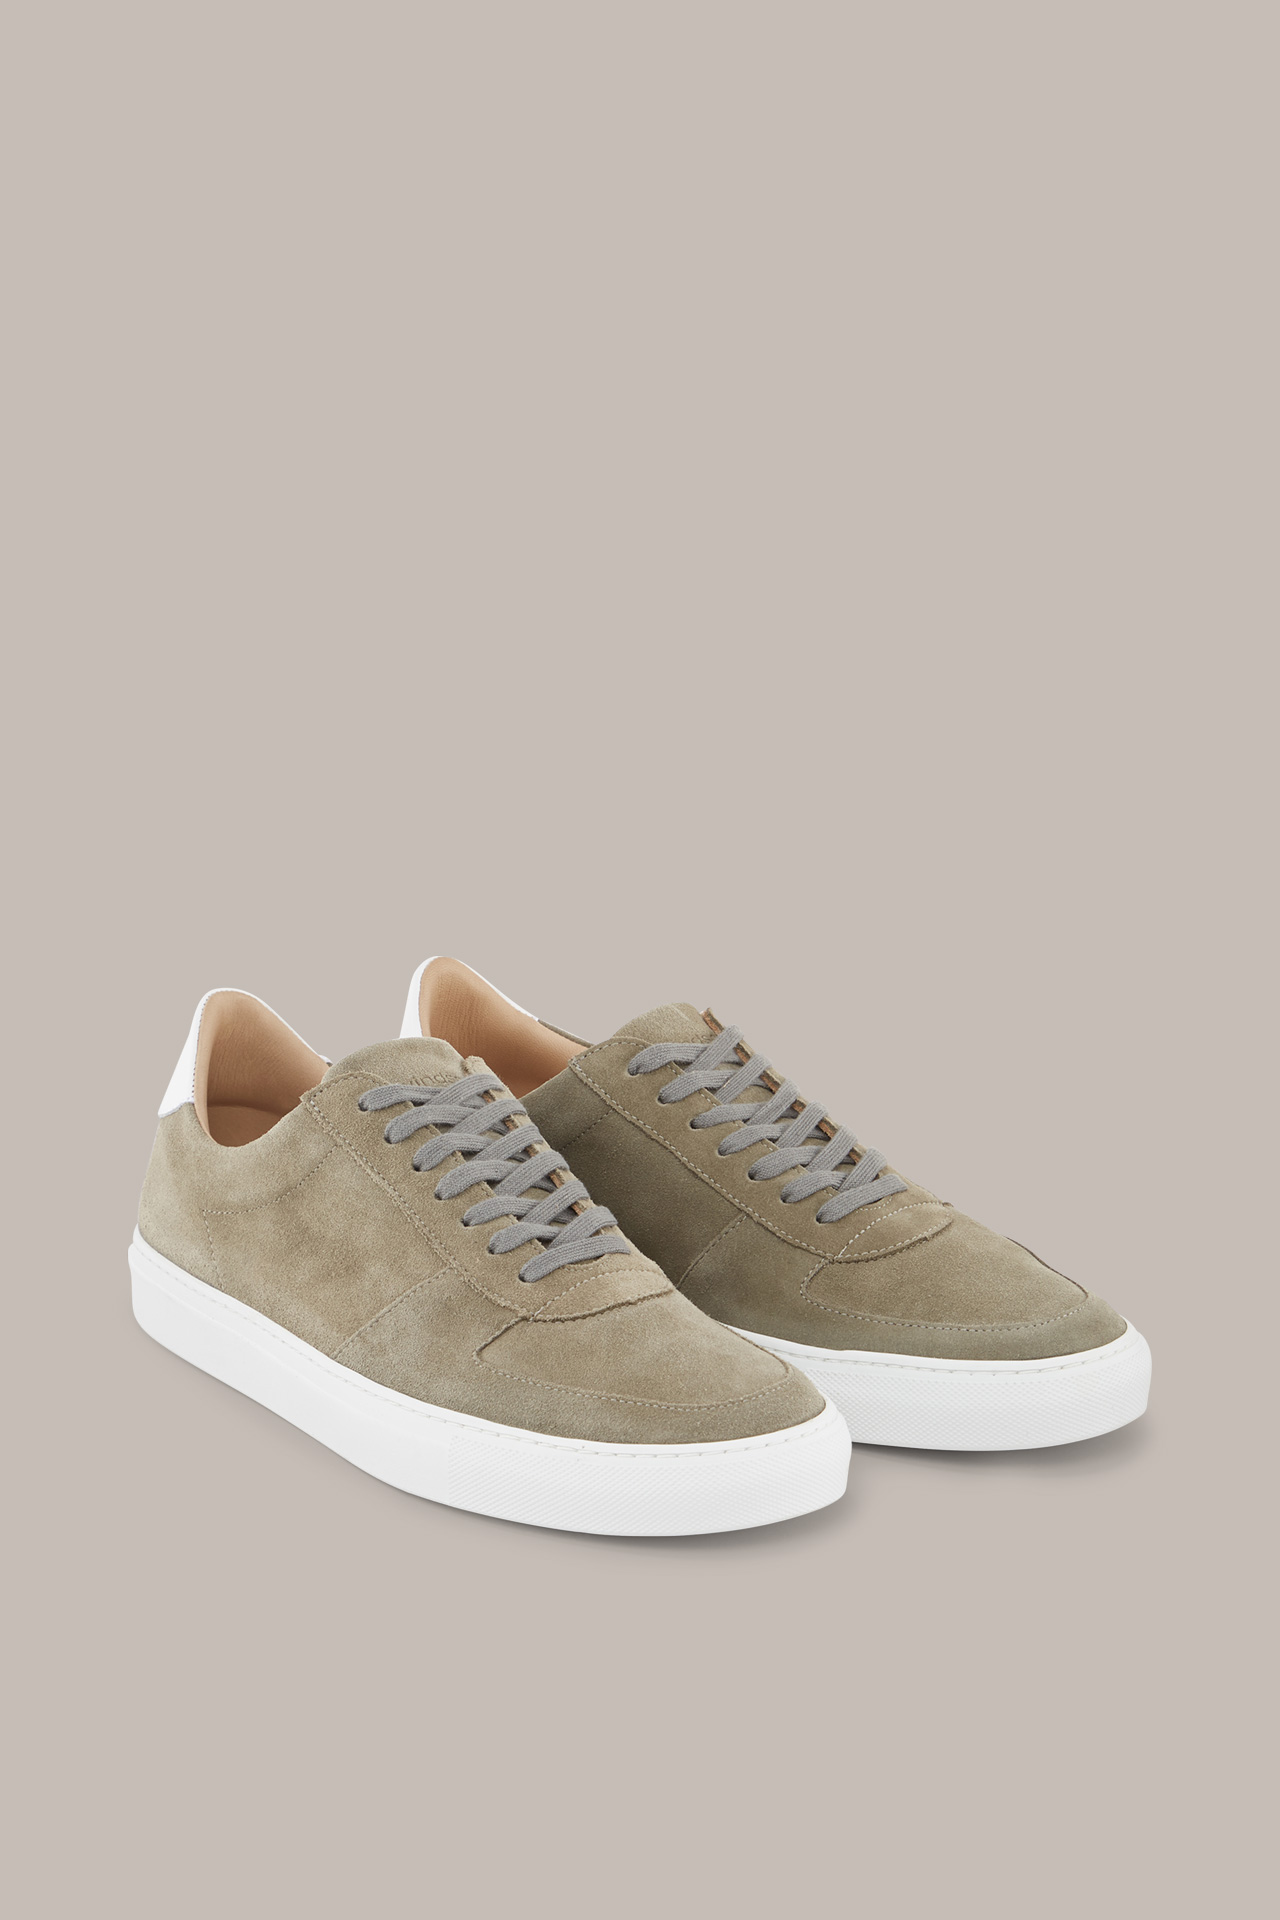  Flat Breeze Sneakers by Ludwig Reiter in Olive/White